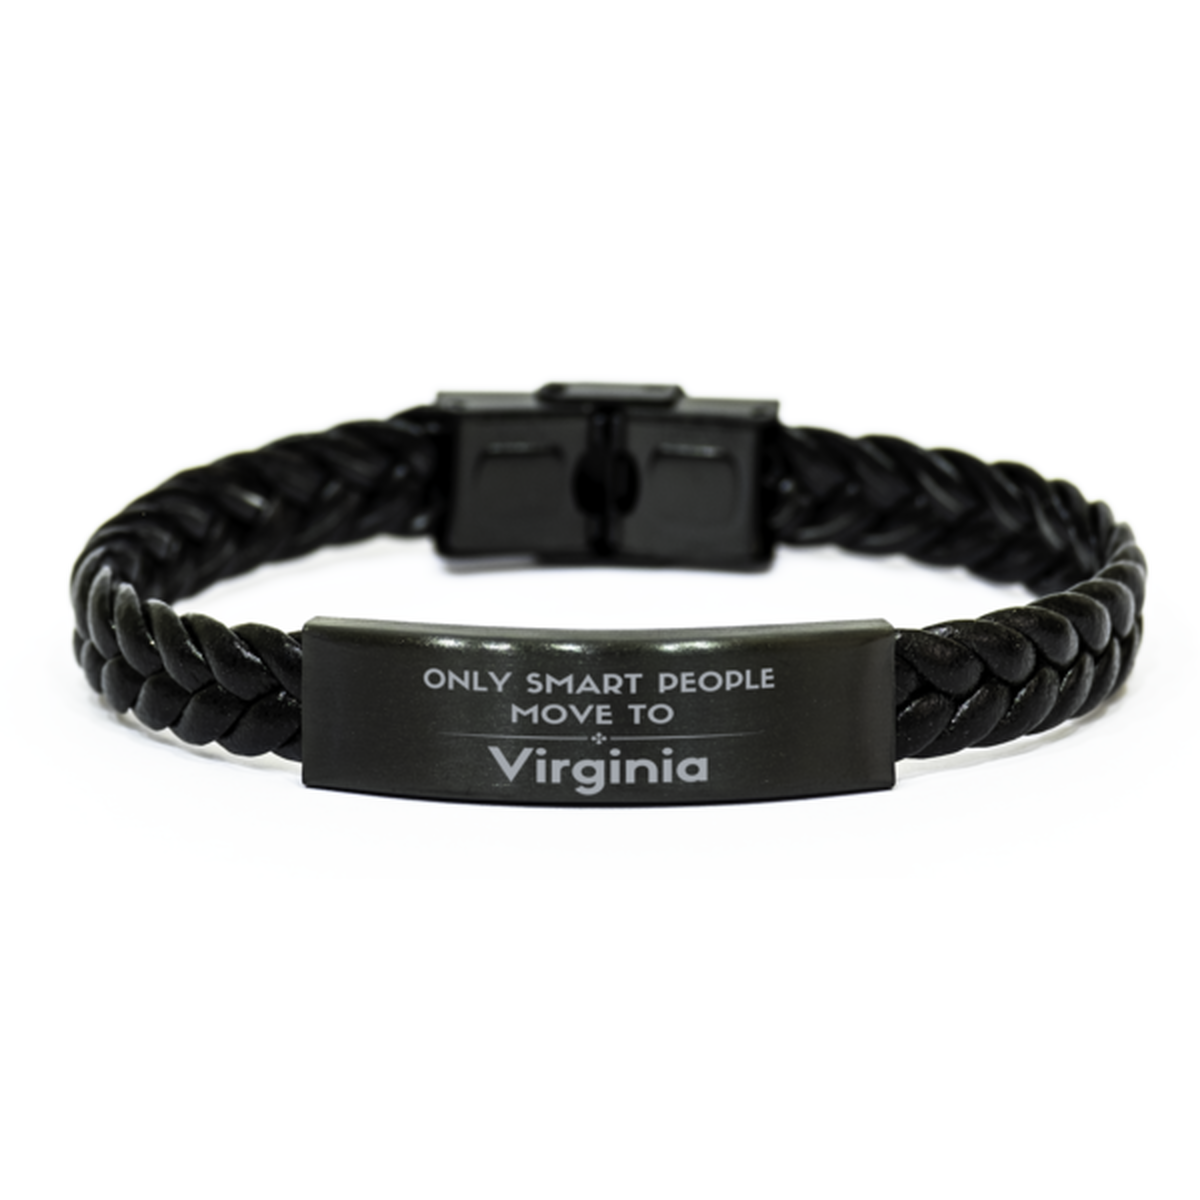 Only smart people move to Virginia Braided Leather Bracelet, Gag Gifts For Virginia, Move to Virginia Gifts for Friends Coworker Funny Saying Quote